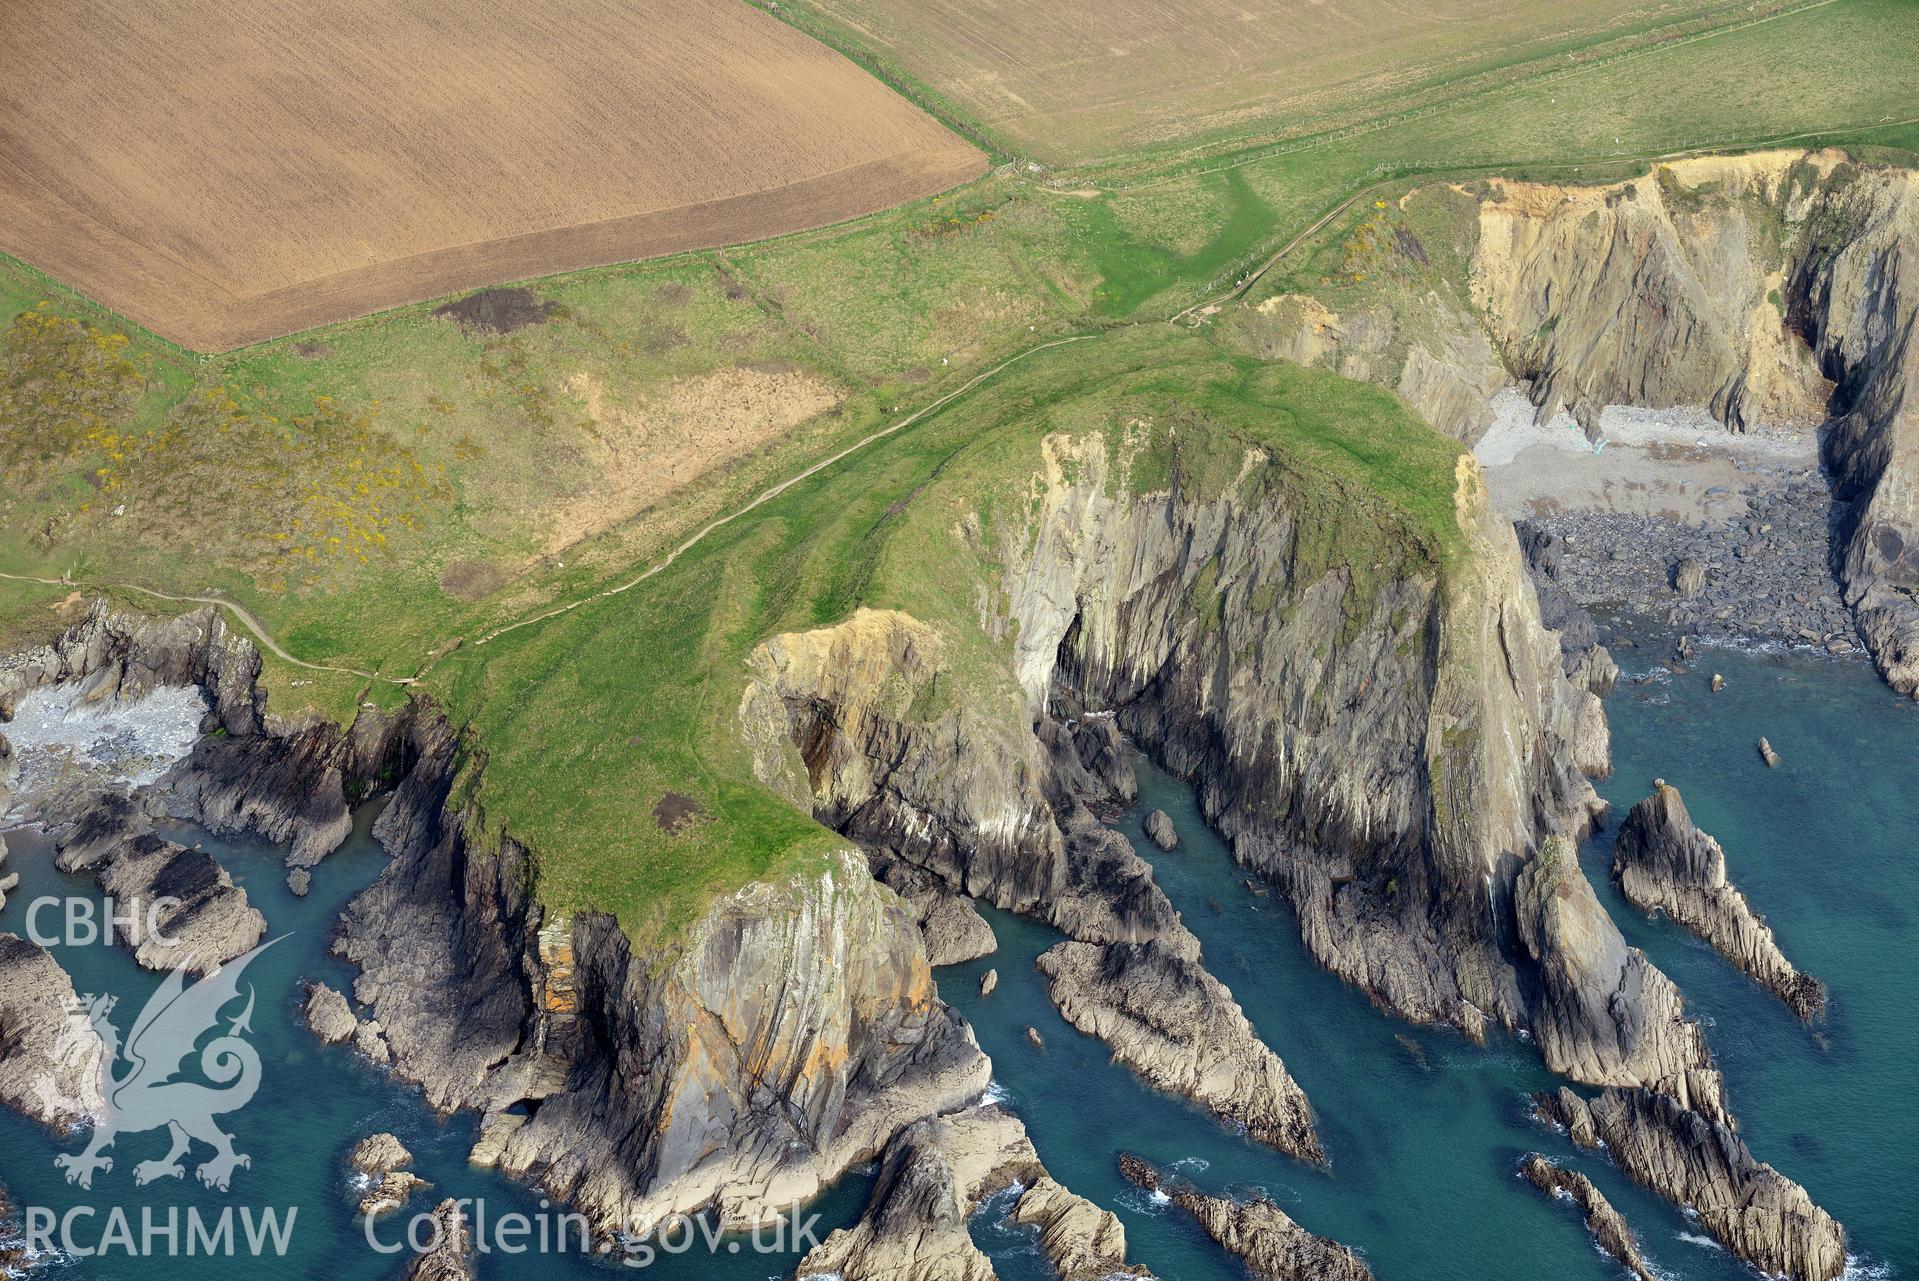 Aerial photography of Porth y Rhaw promontory fort taken on 27th March 2017 for structure from motion recording. Baseline aerial reconnaissance survey for the CHERISH Project. ? Crown: CHERISH PROJECT 2019. Produced with EU funds through the Ireland Wales Co-operation Programme 2014-2020. All material made freely available through the Open Government Licence.